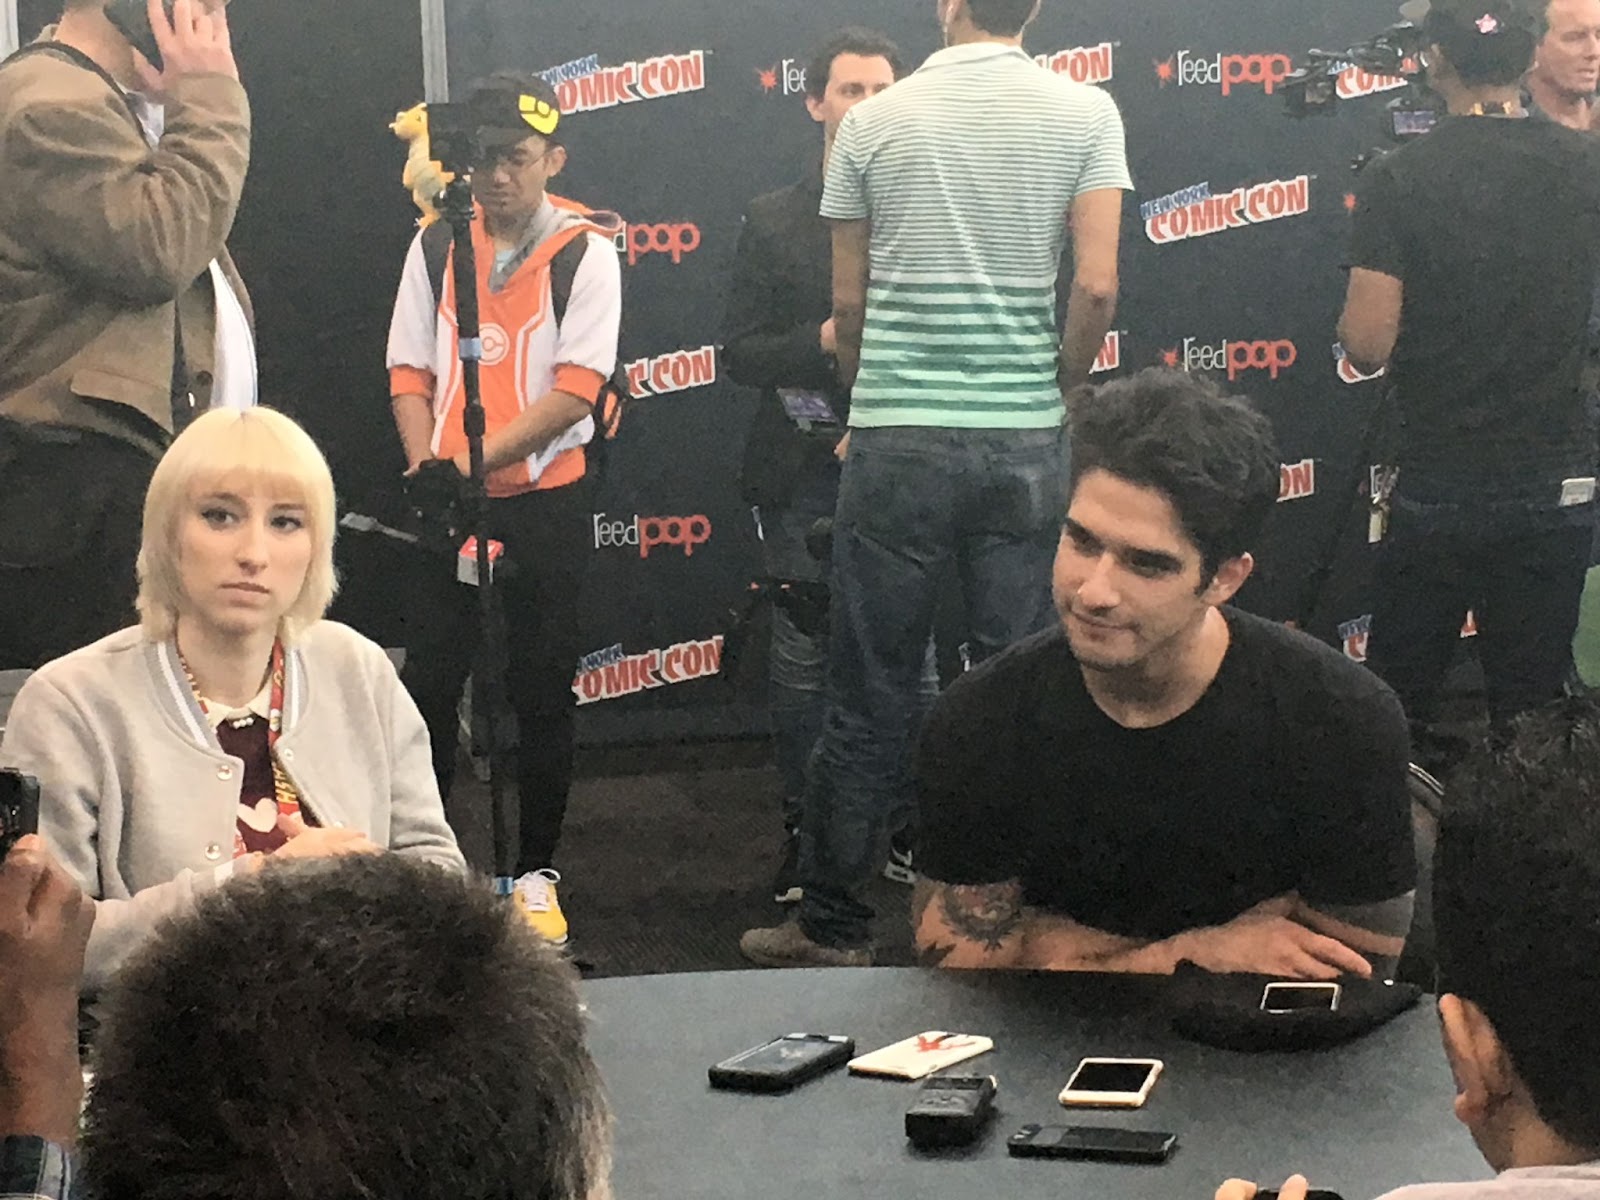 NYCC Oct. 2016 - I got a press pass through work and interviewed celebrities for articles (pictured here, Tyler Posey) Being in a wheelchair and frequent breaks in the press lounge all weekend made the event accessible for me!